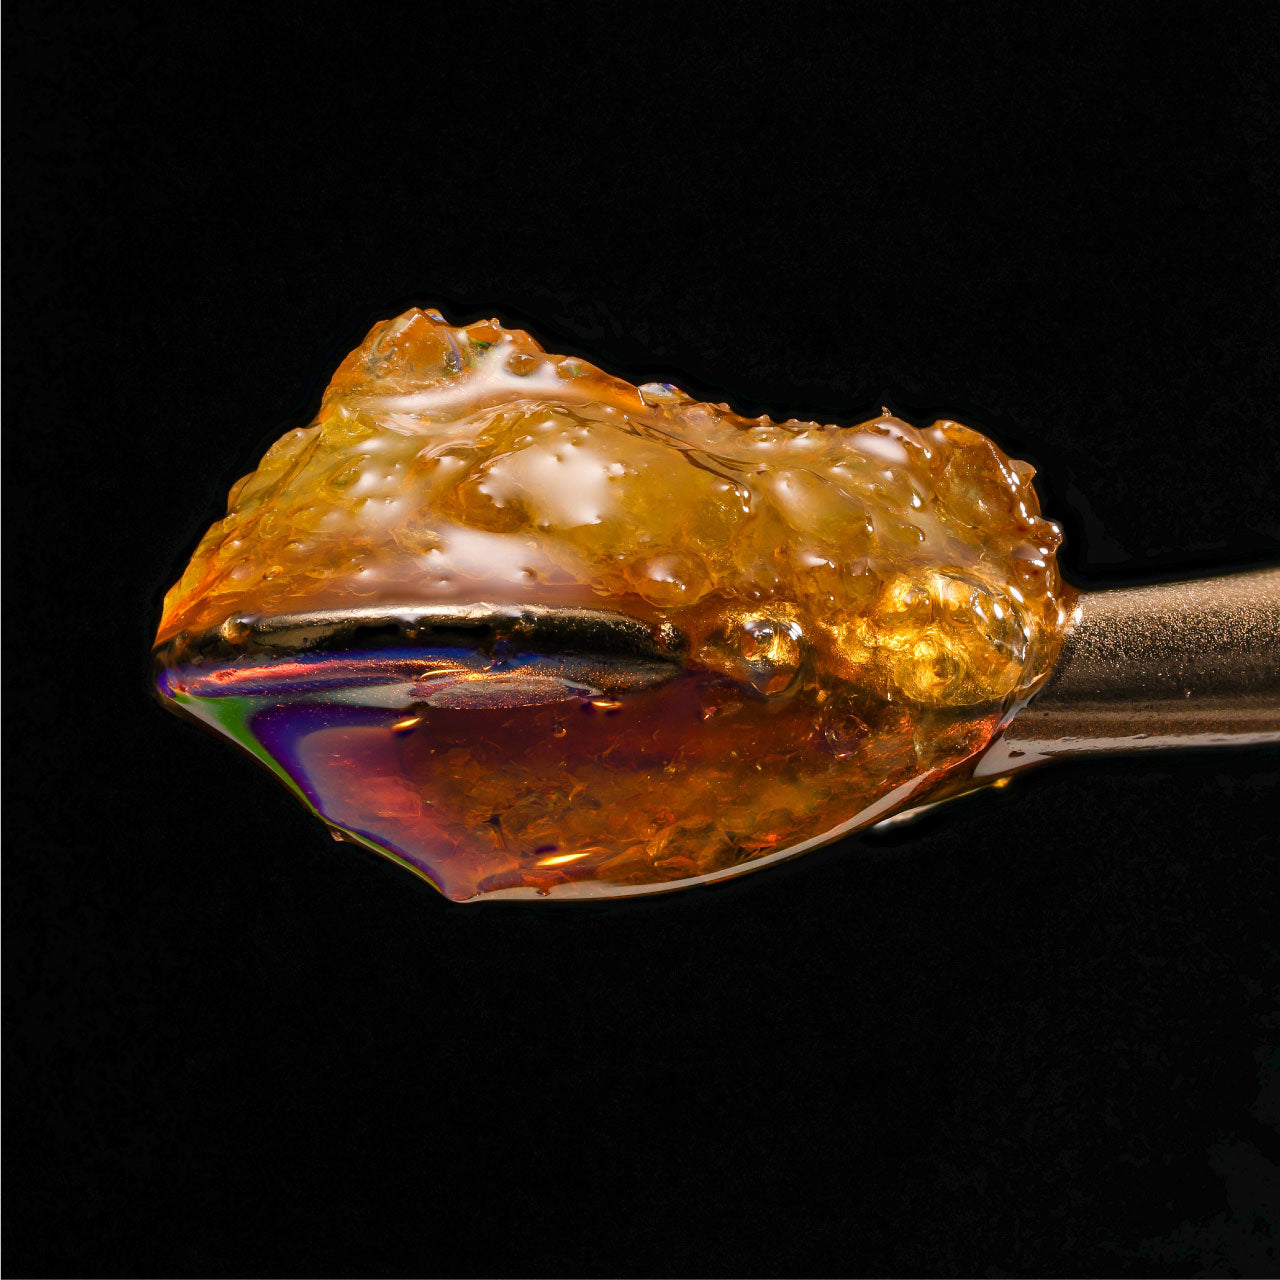 Image of CBD live resin concentrate on a dab tool